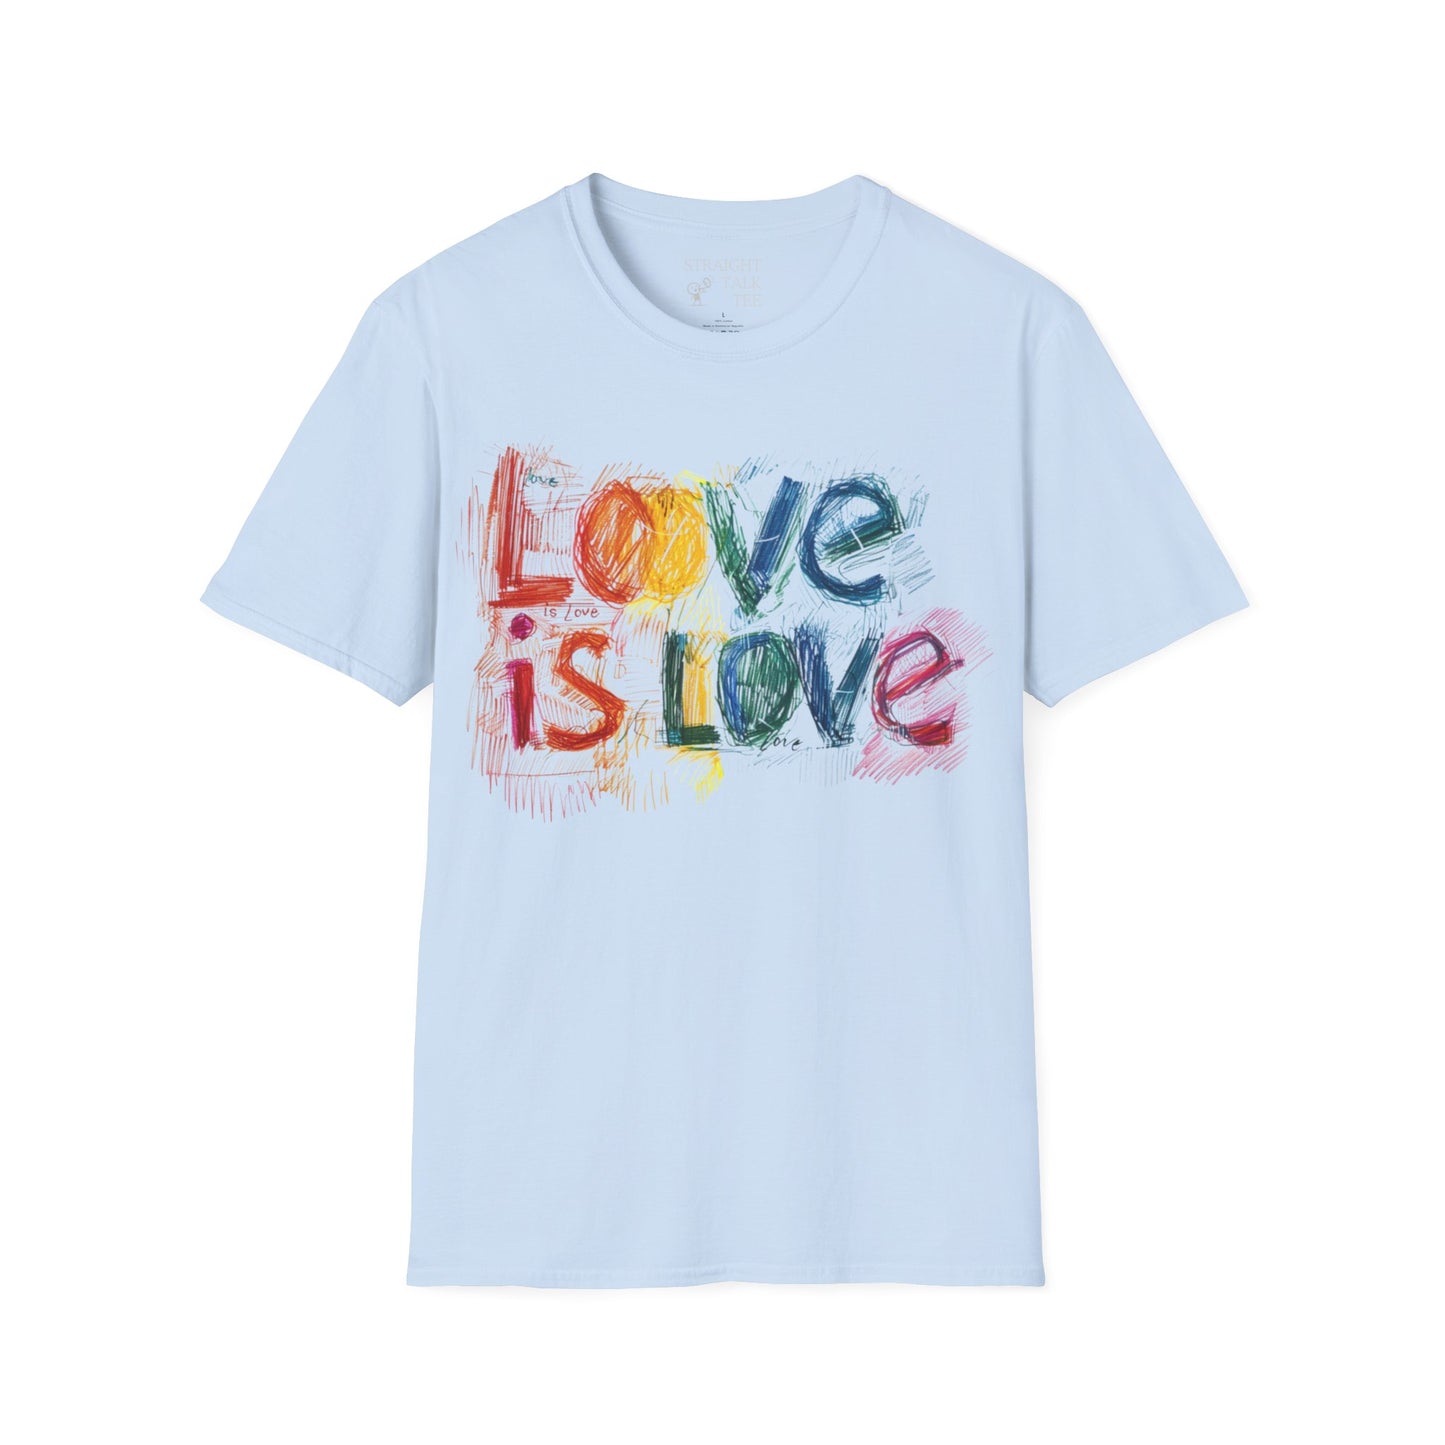 Love is Love! Bold and Inspirational Soft-Syle t-shirt |unisex| Evocative Expressionist Style Political Activism